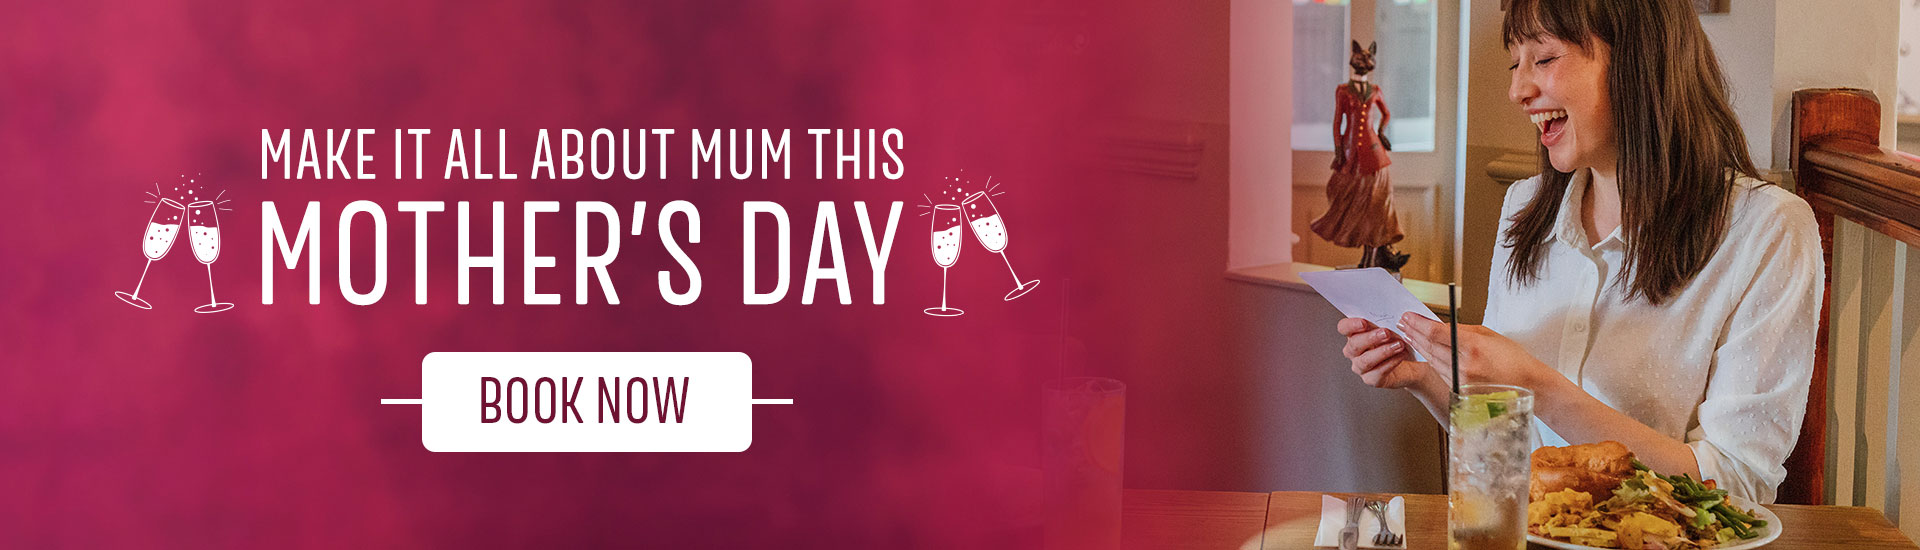 Mother’s Day in Sutton Coldfield, Mother’s Day 2023, Mother’s Day at Toby Carvery